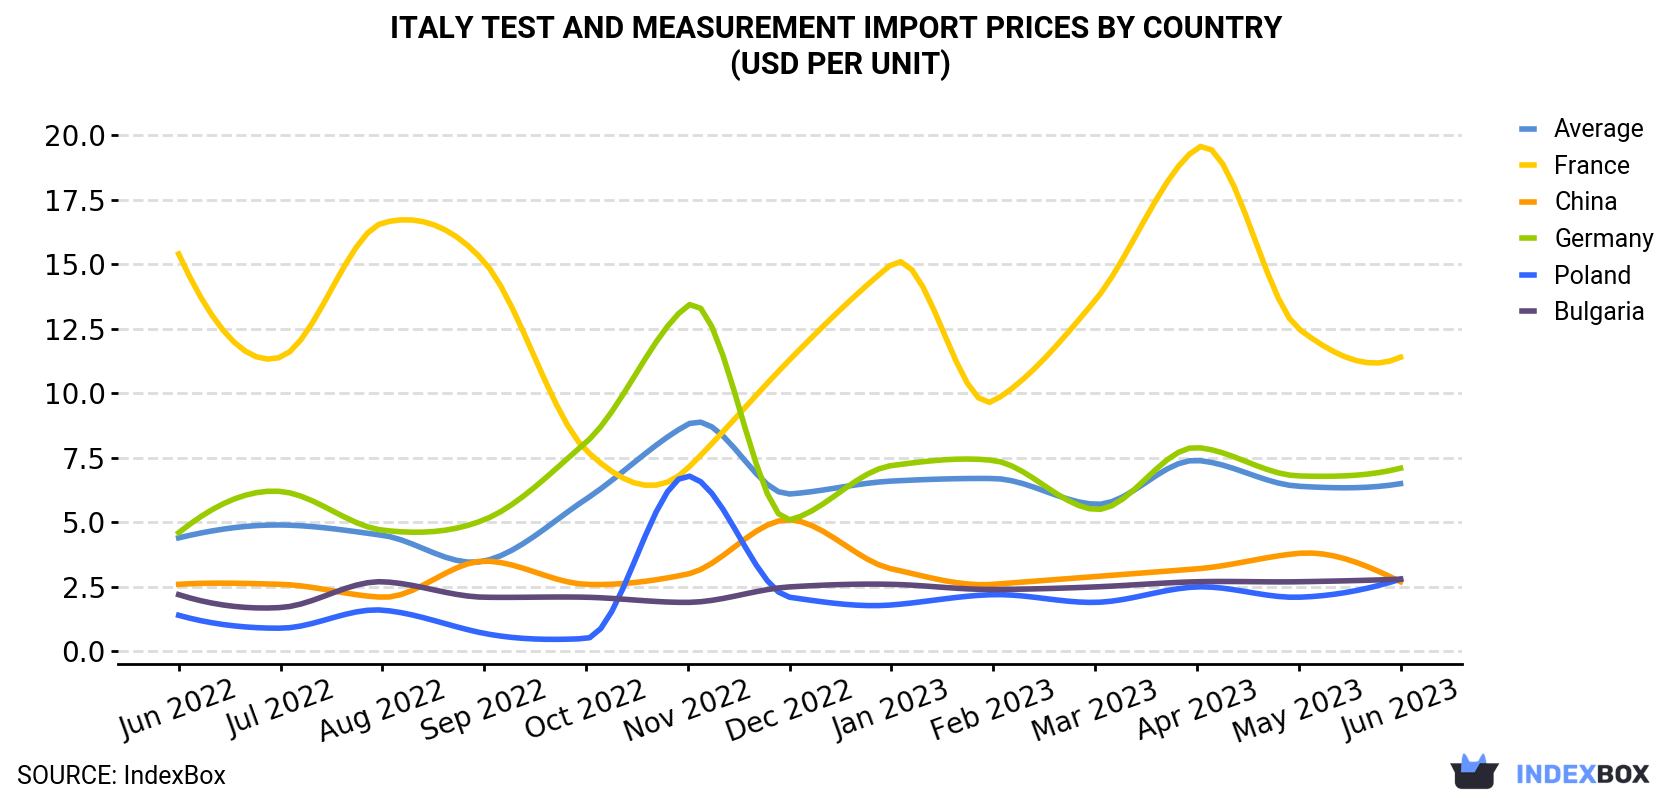 Italy Test And Measurement Import Prices By Country (USD Per Unit)